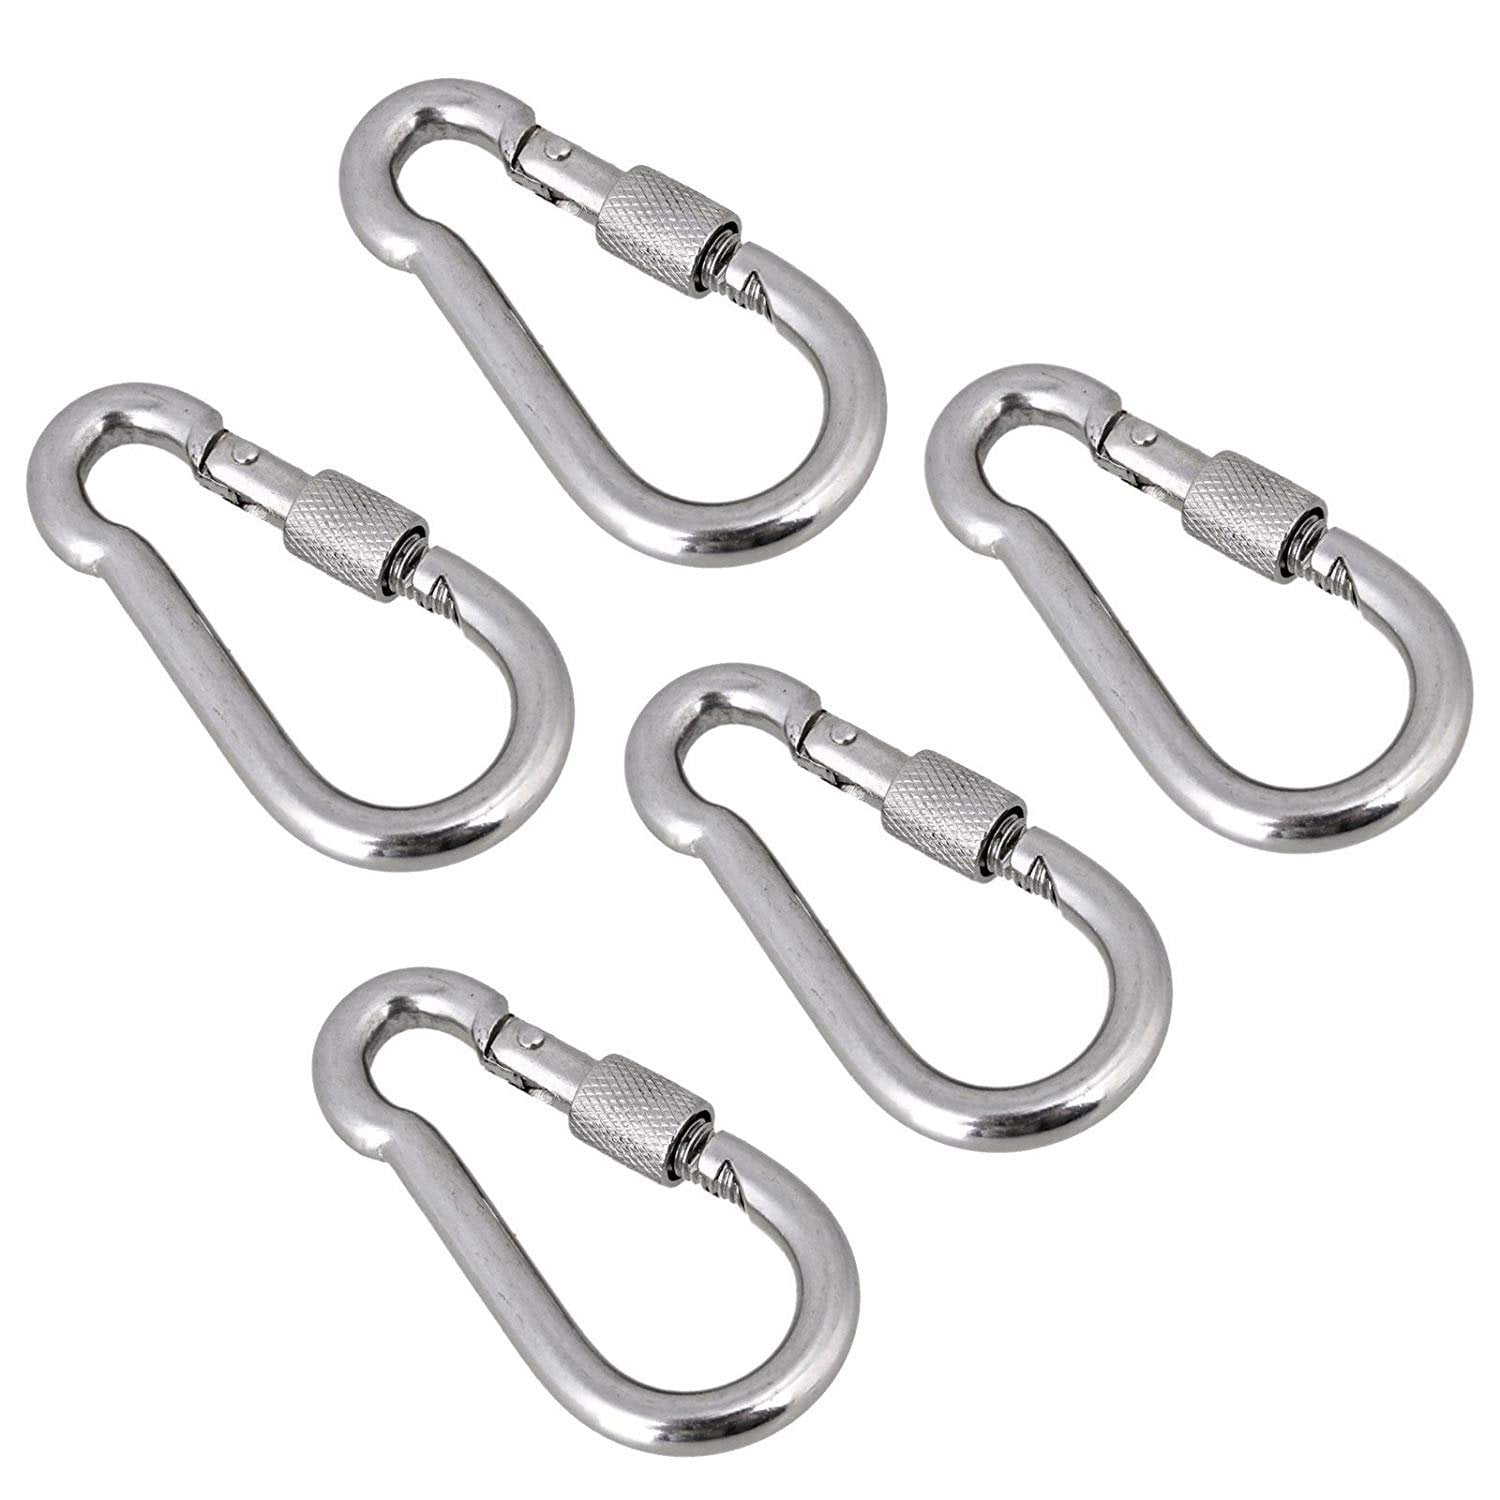 11/32" 3.5" Industrial Carabiner Snap Hook Truck Loading Tow Chain Link Locking 